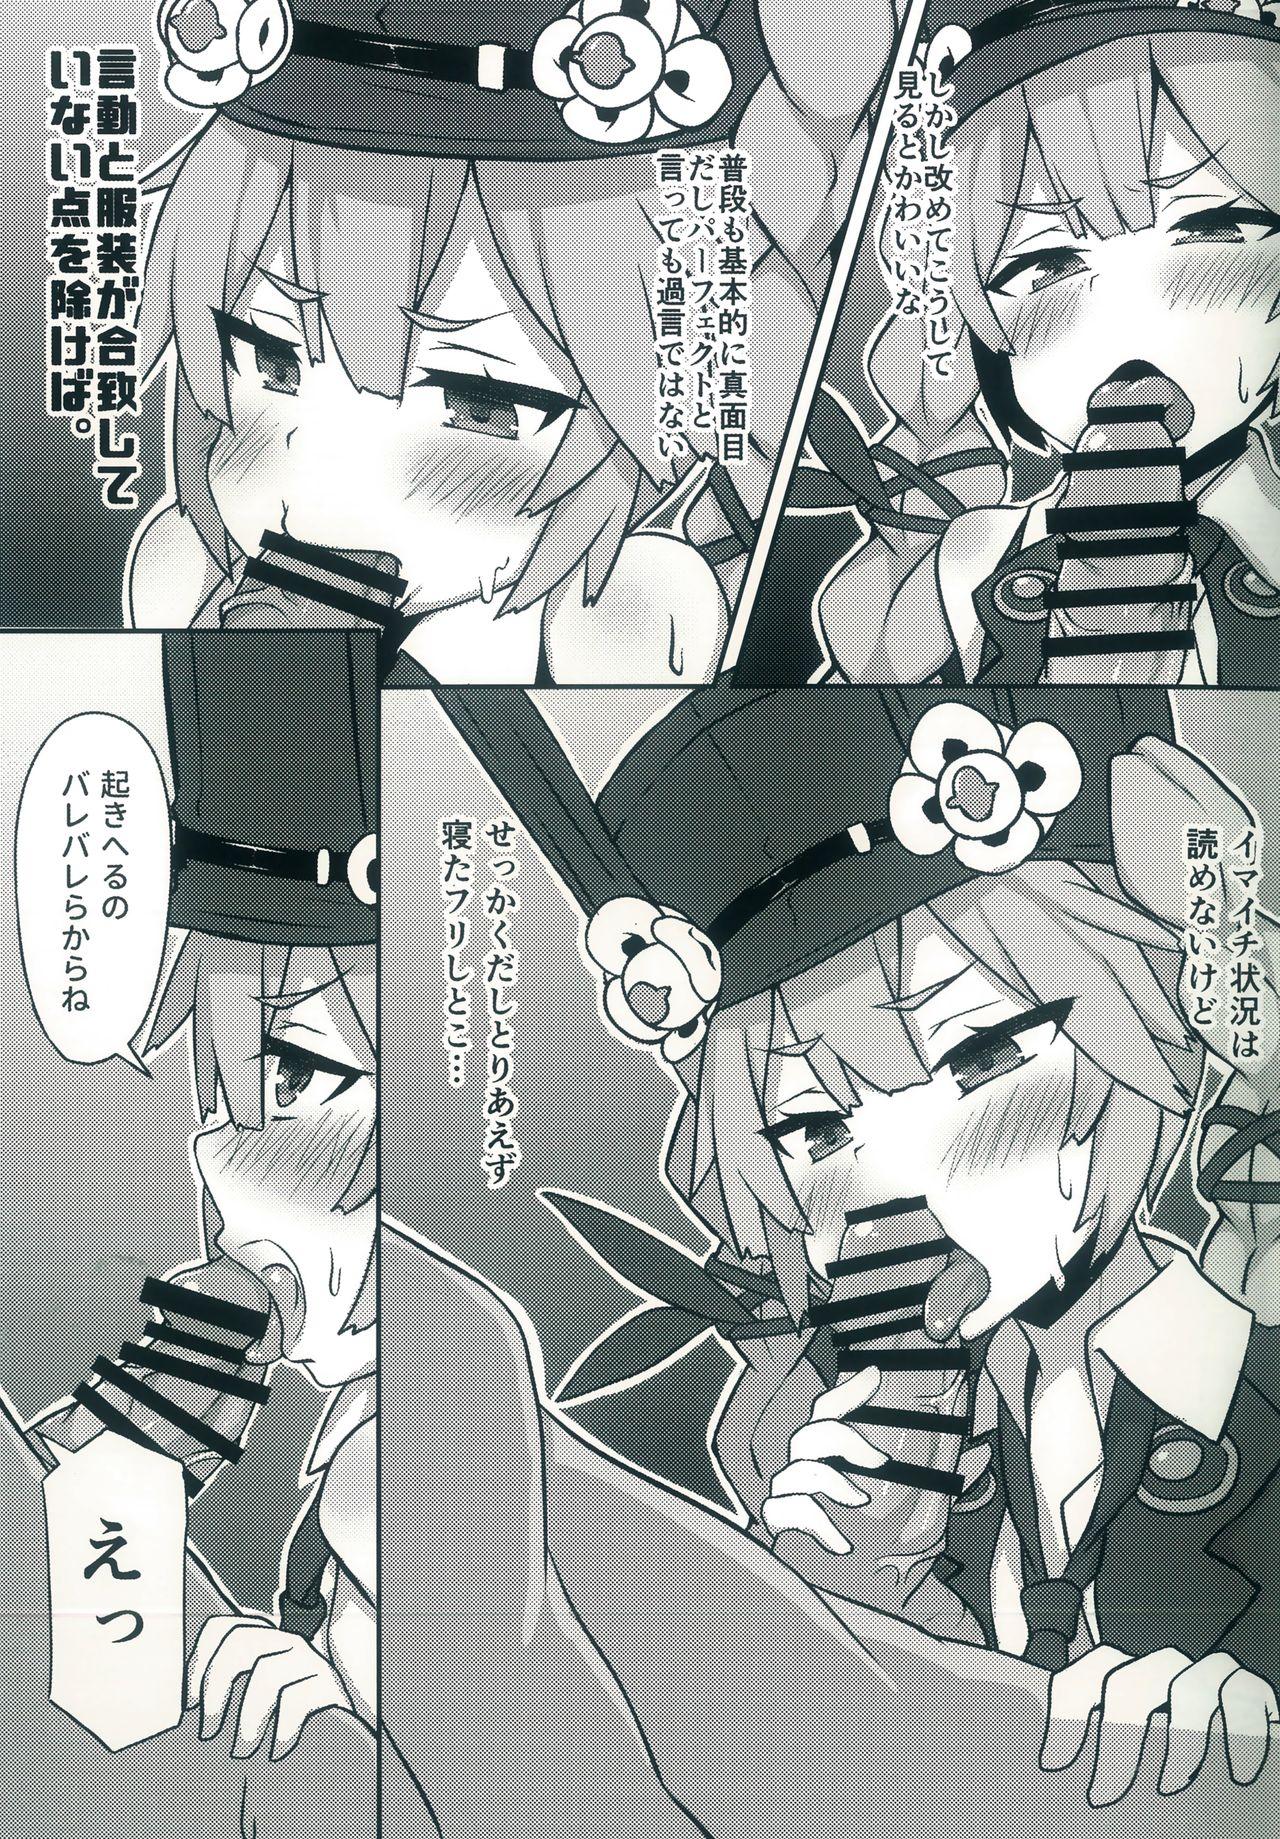 Cunt Dummy rabby - Girls frontline Free Rough Sex - Page 9